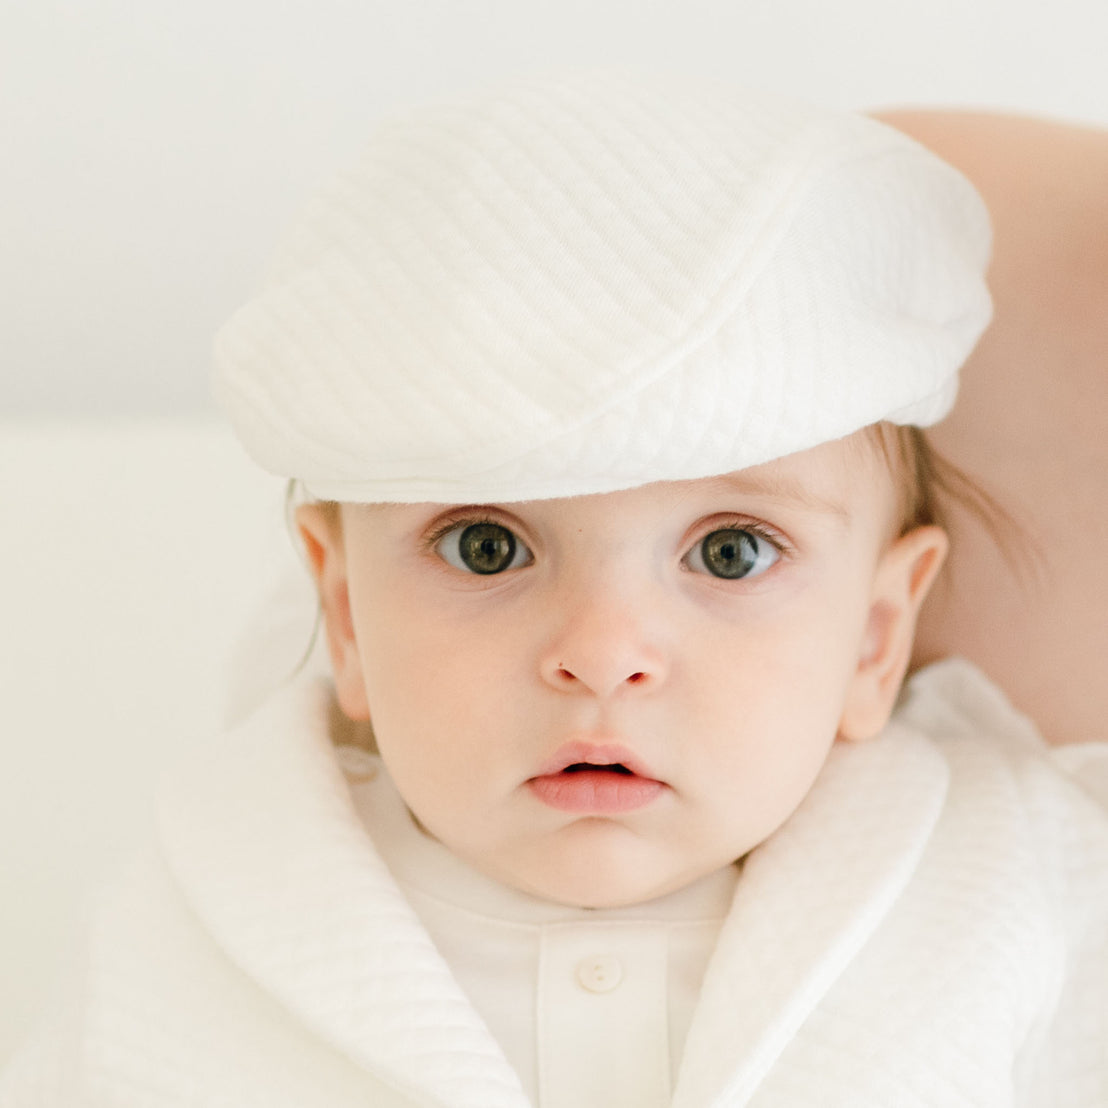 Baby boy wearing the Braden Newsboy Cap made from white quilt